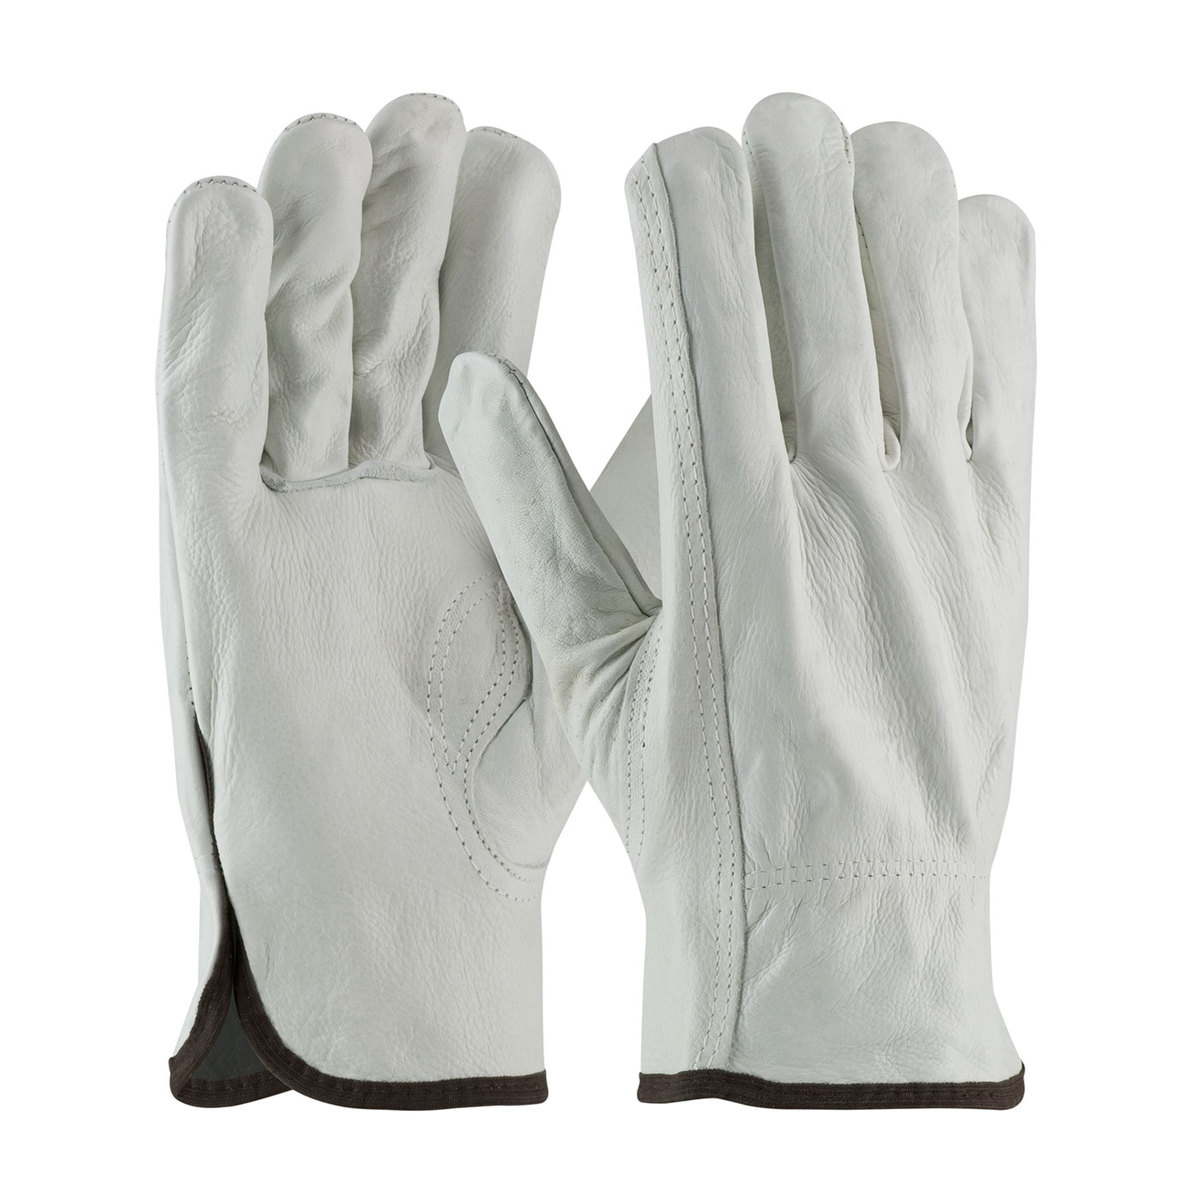 PIP® Large Natural Top Grain Cowhide Unlined Drivers Gloves